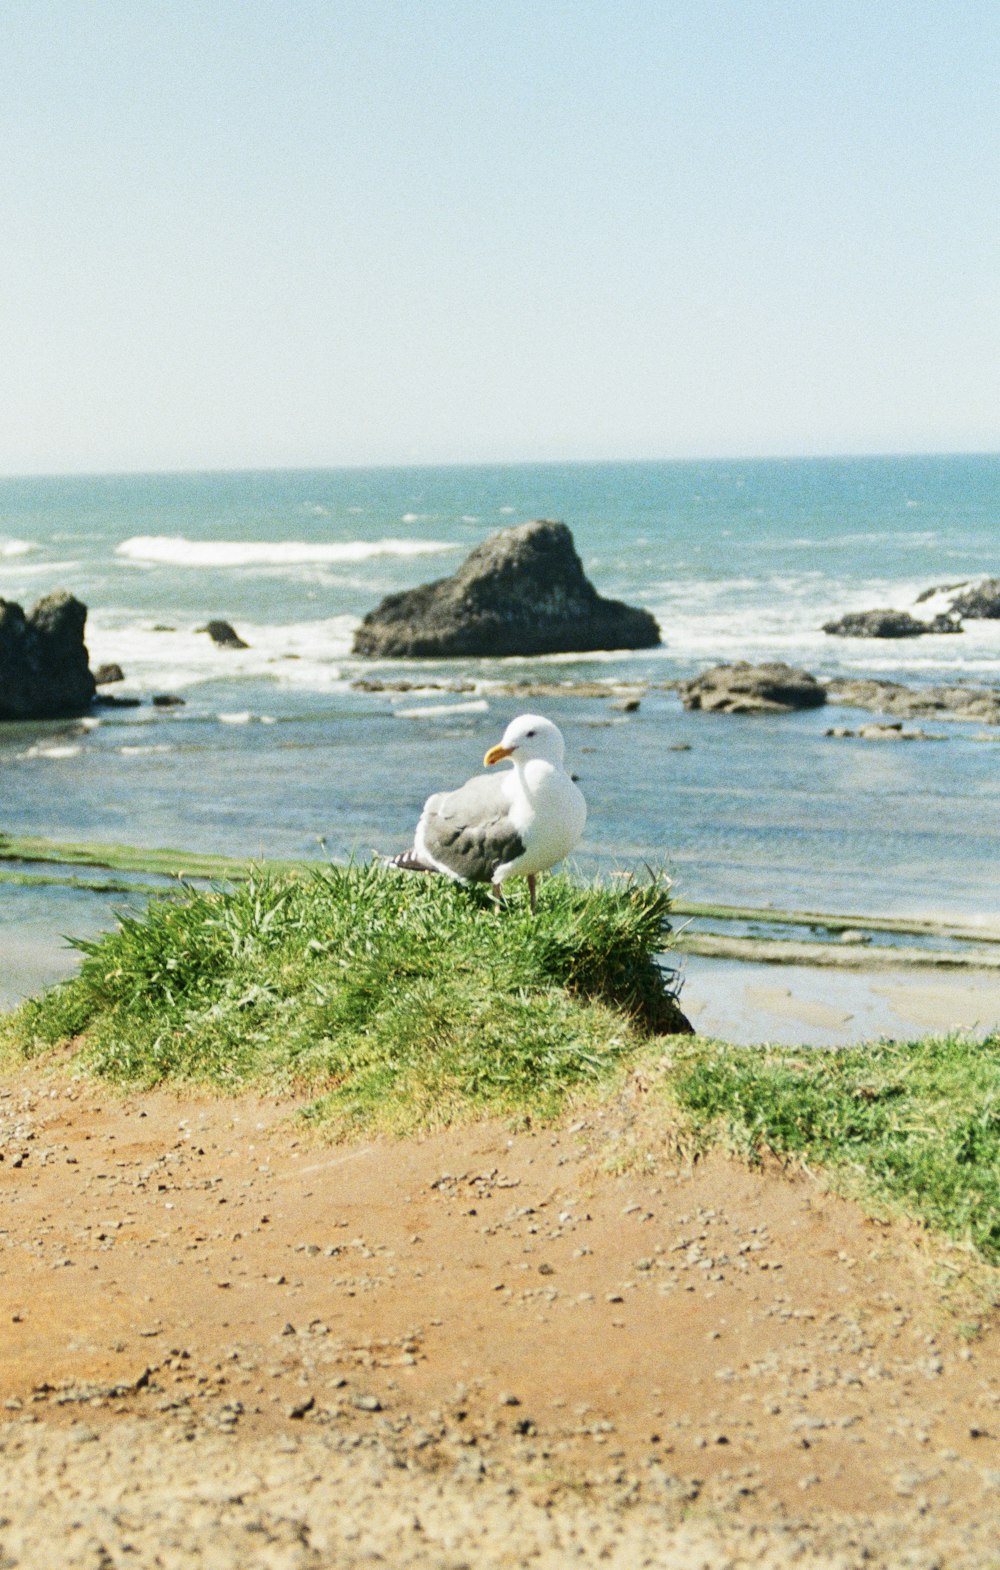 a seagull is sitting on the sand near the water